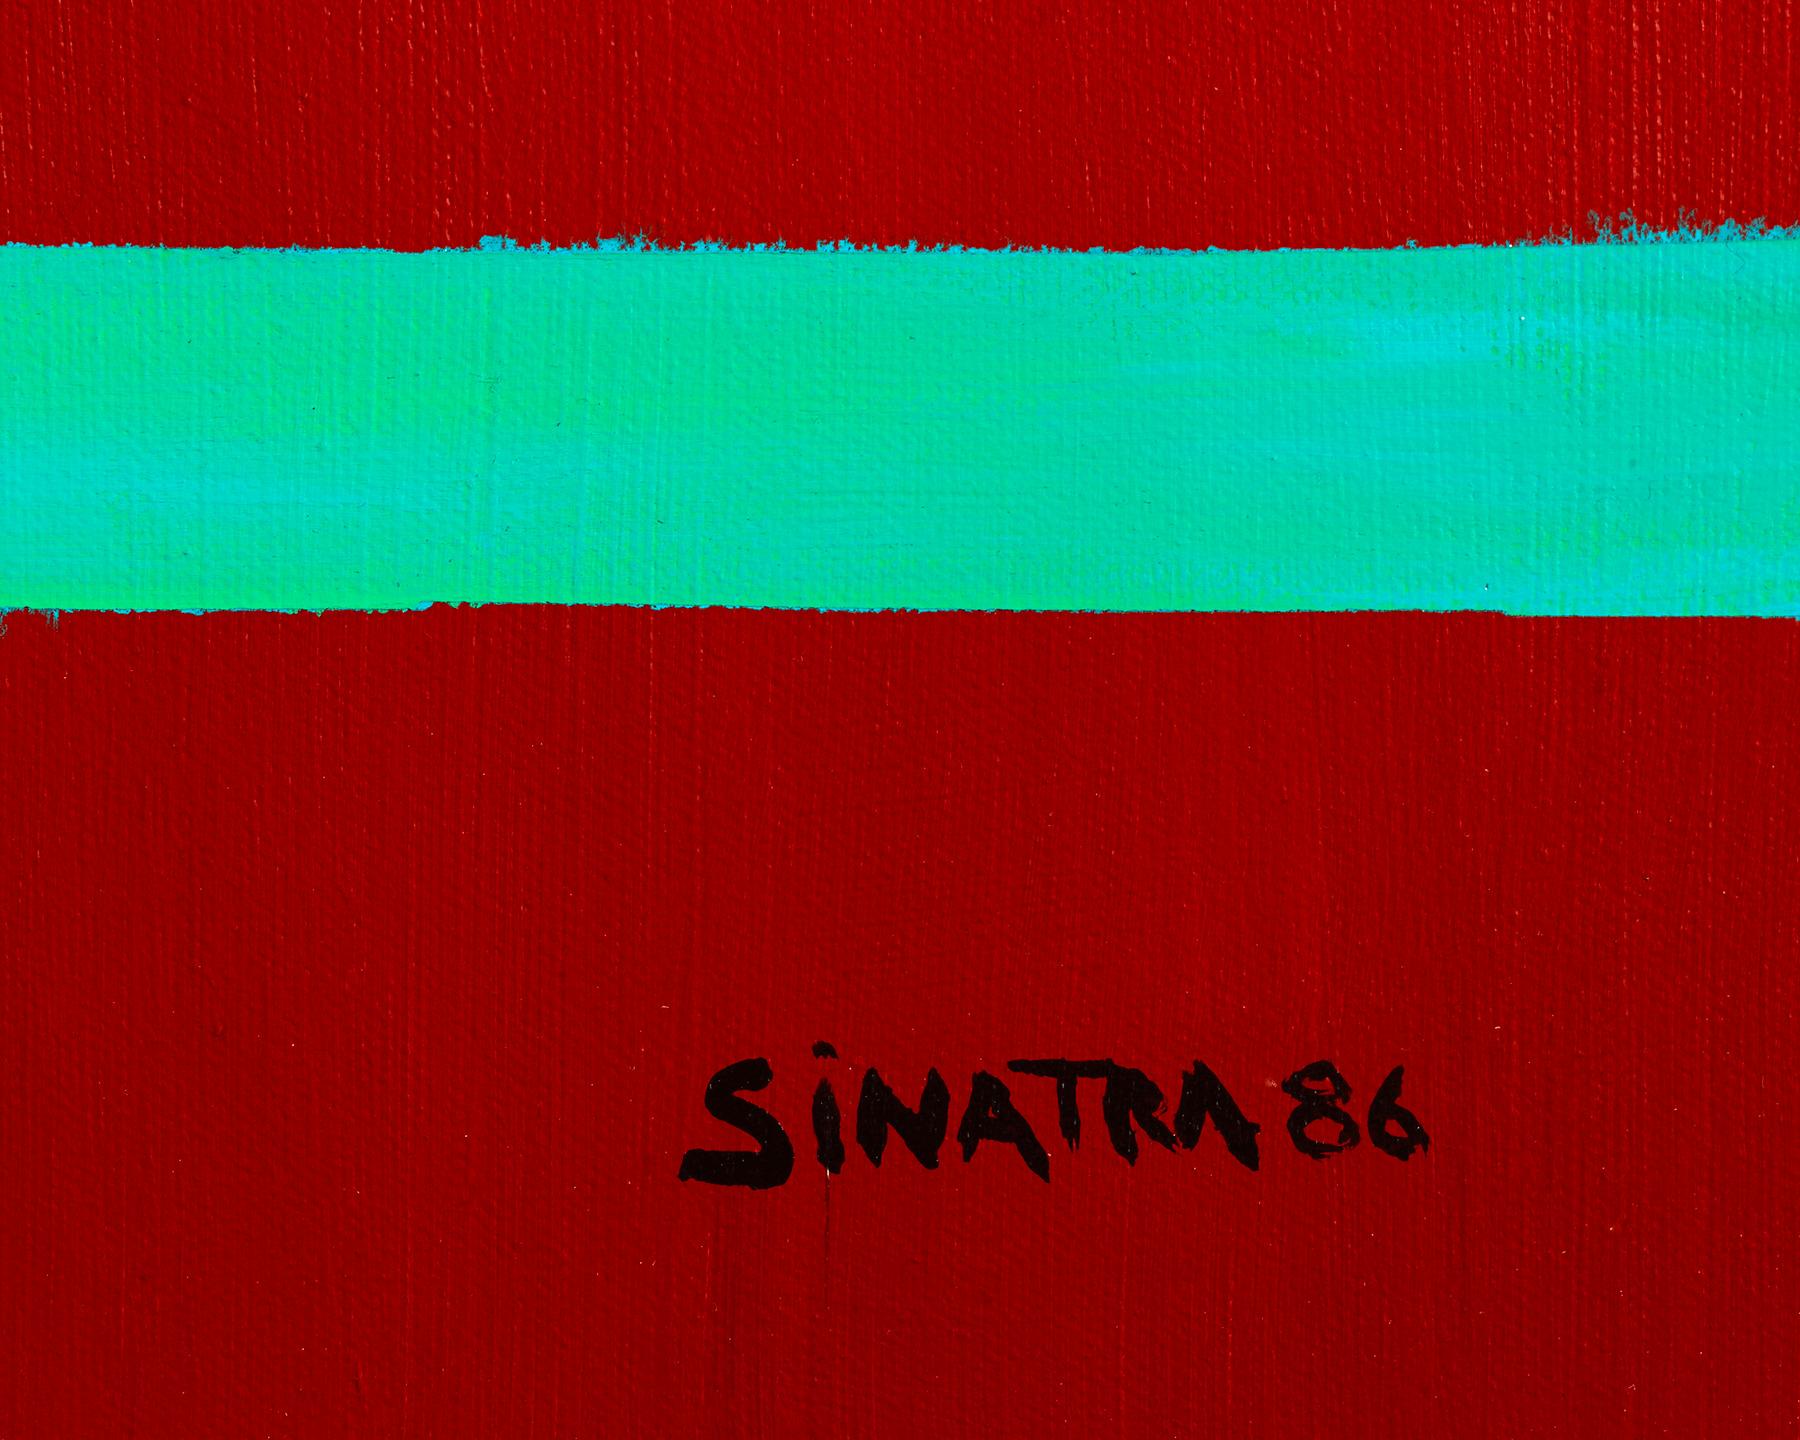 Untitled - Abstract Painting by Frank Sinatra